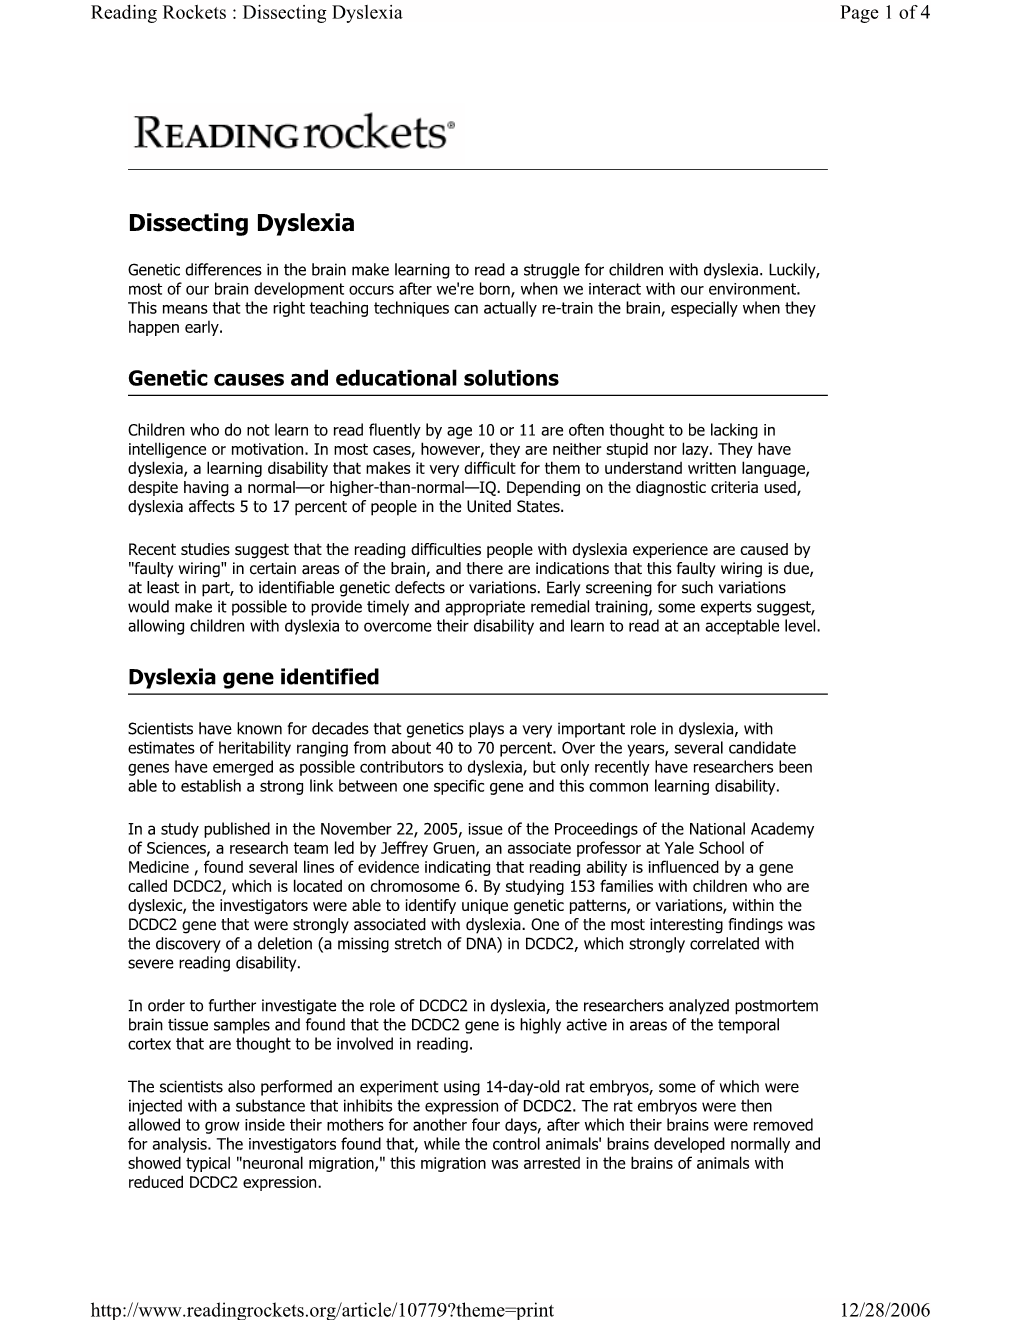 Dissecting Dyslexia Page 1 of 4